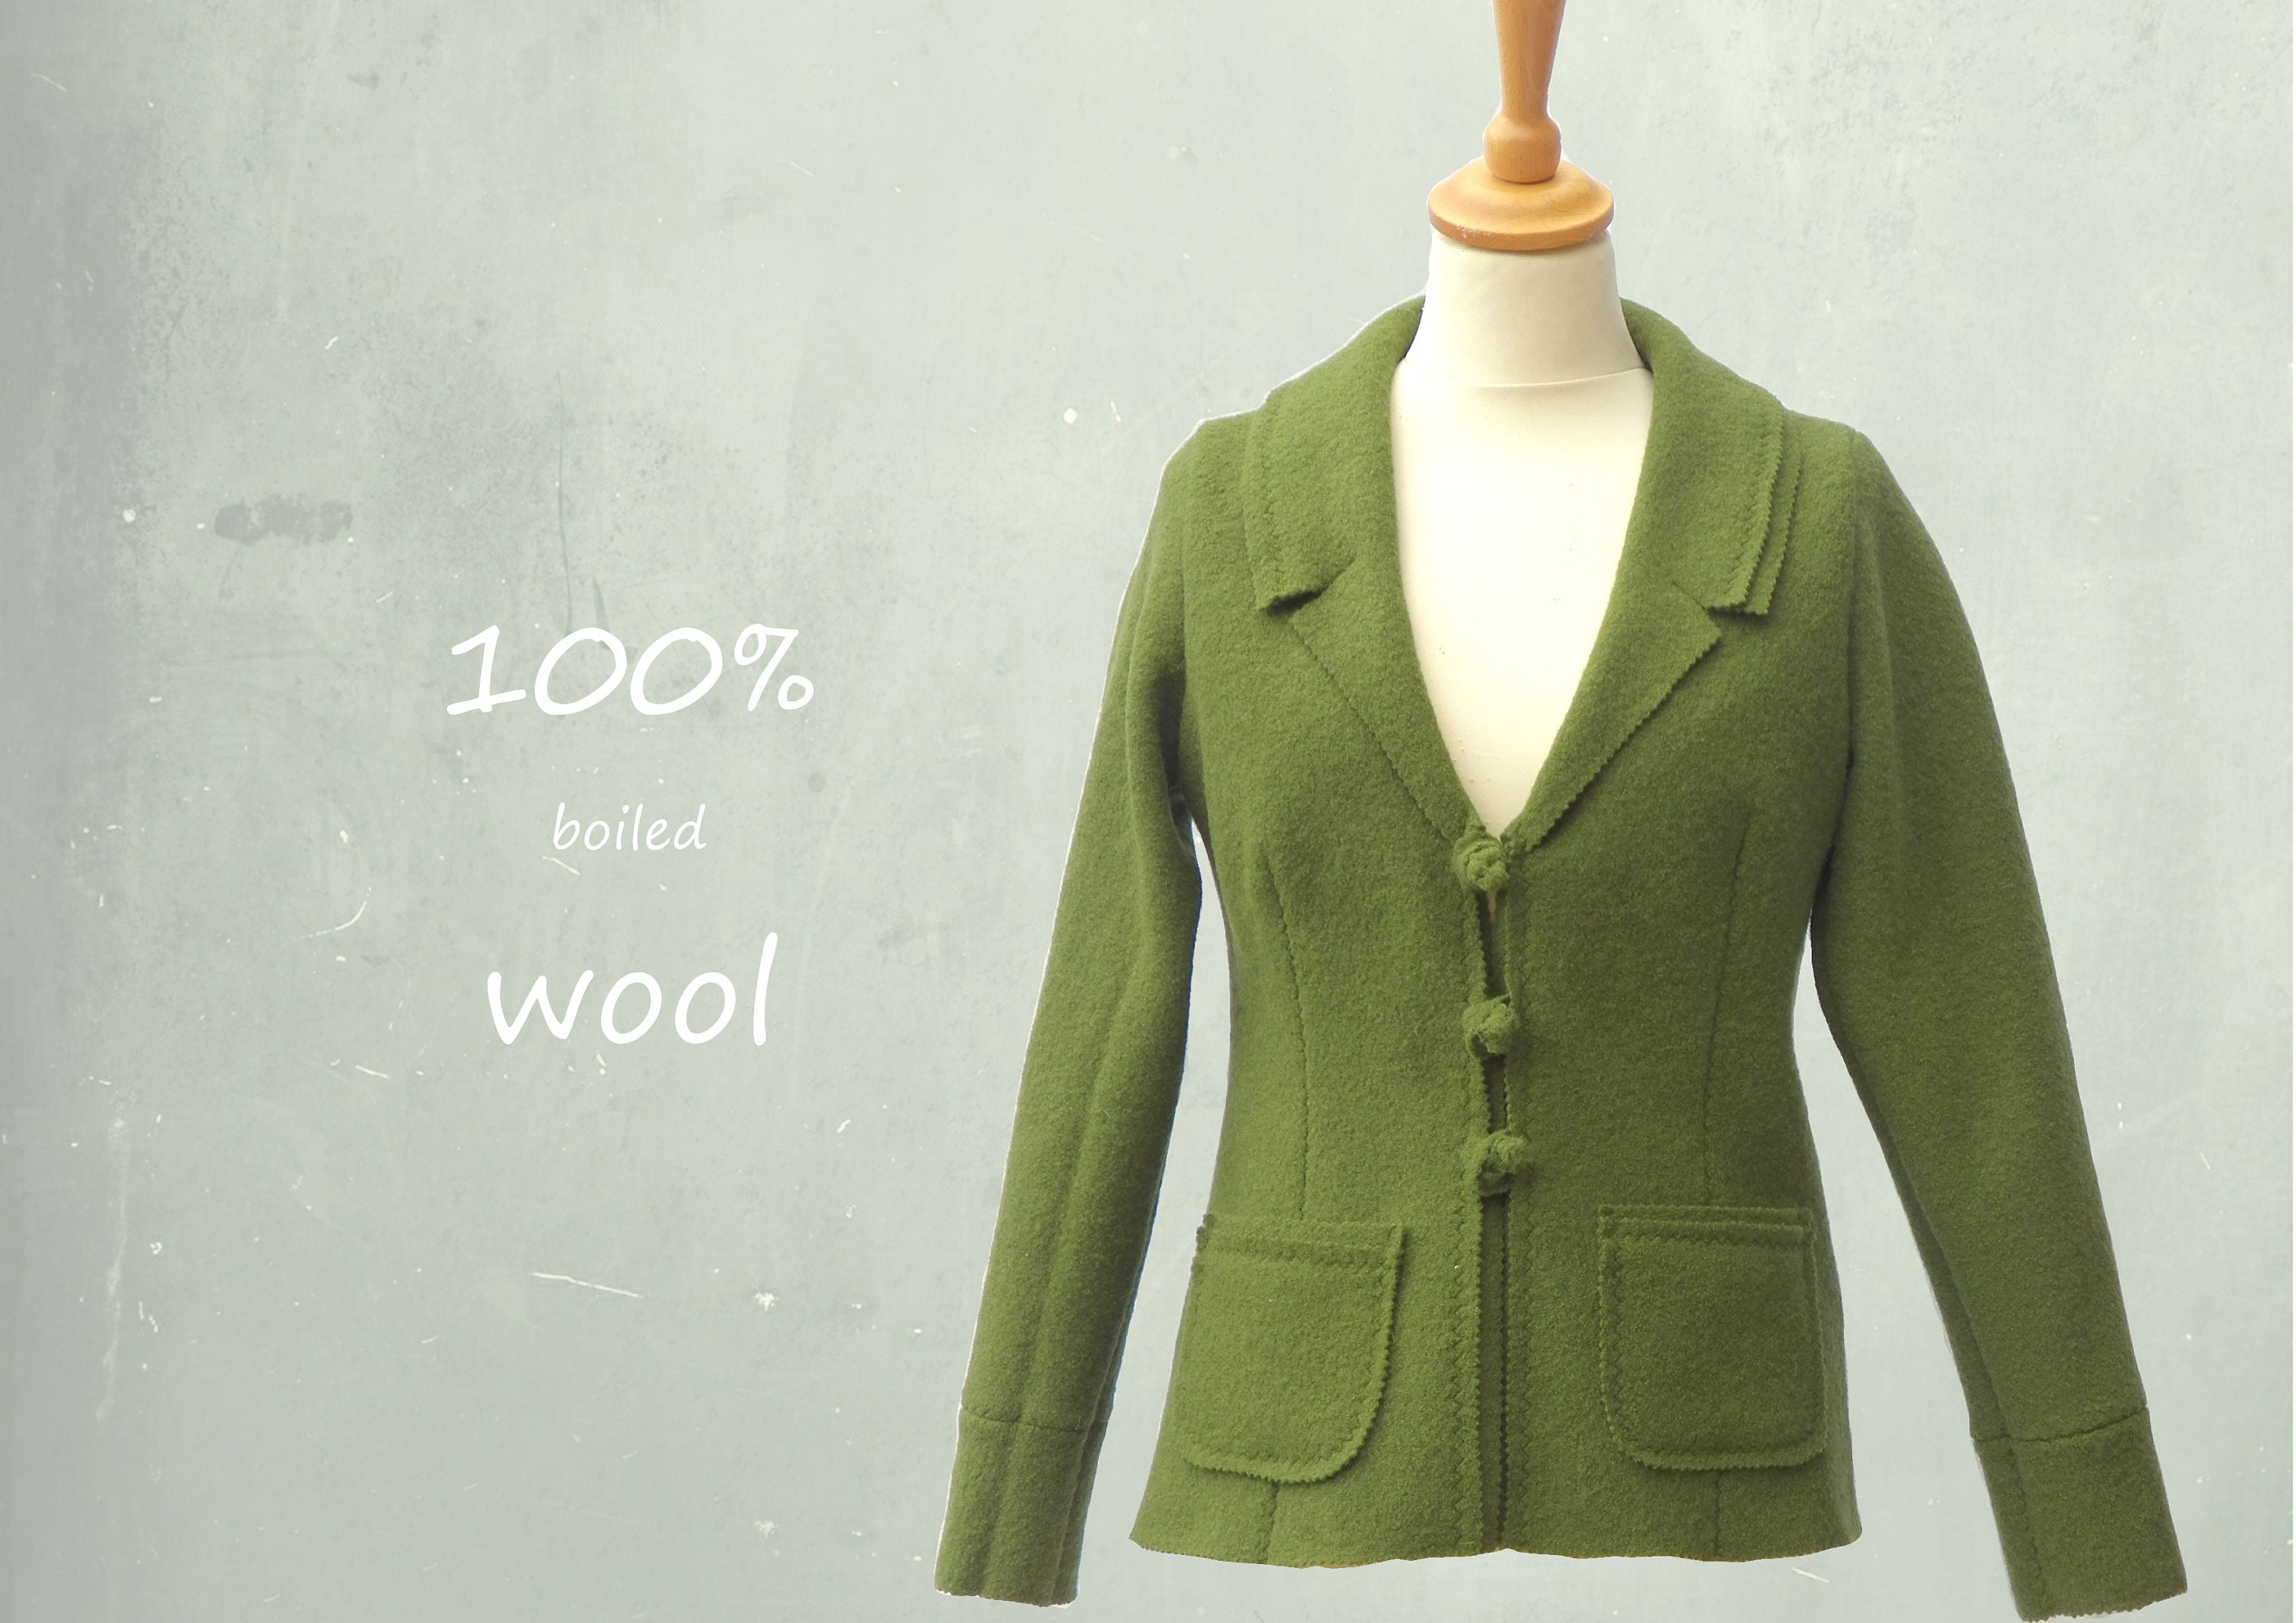 Vest-jacket in boiled wool, recycable jacket